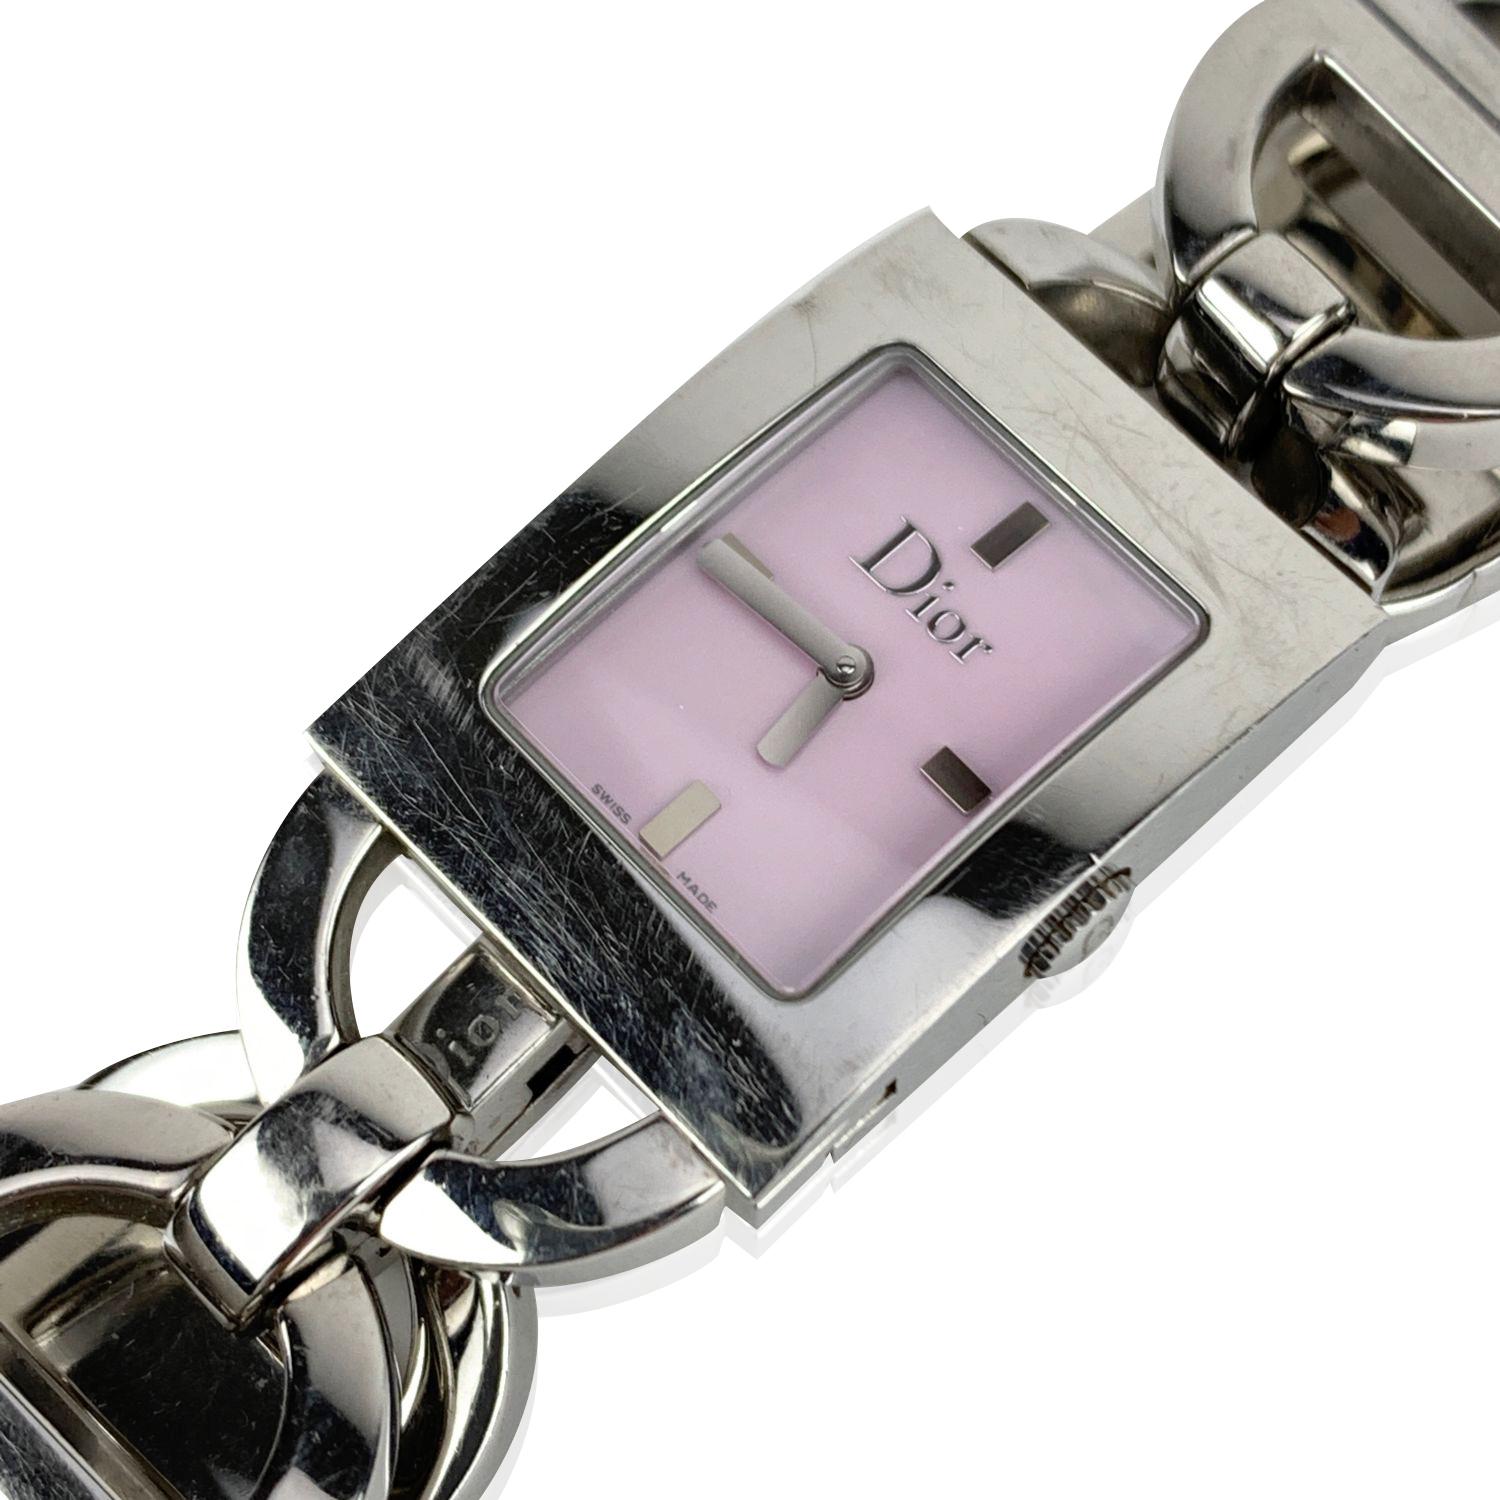 Christian Dior 'Malice', Mod. D78-109, stainless steel wrist watch. Pink Dial and Sapphire crystal. Swiss Made Quartz movement. 'Dior' written on the dial. Water Resistant to 3 atm. Clasp closure. Swiss Made. Total length: 6.5 inches - 16.5